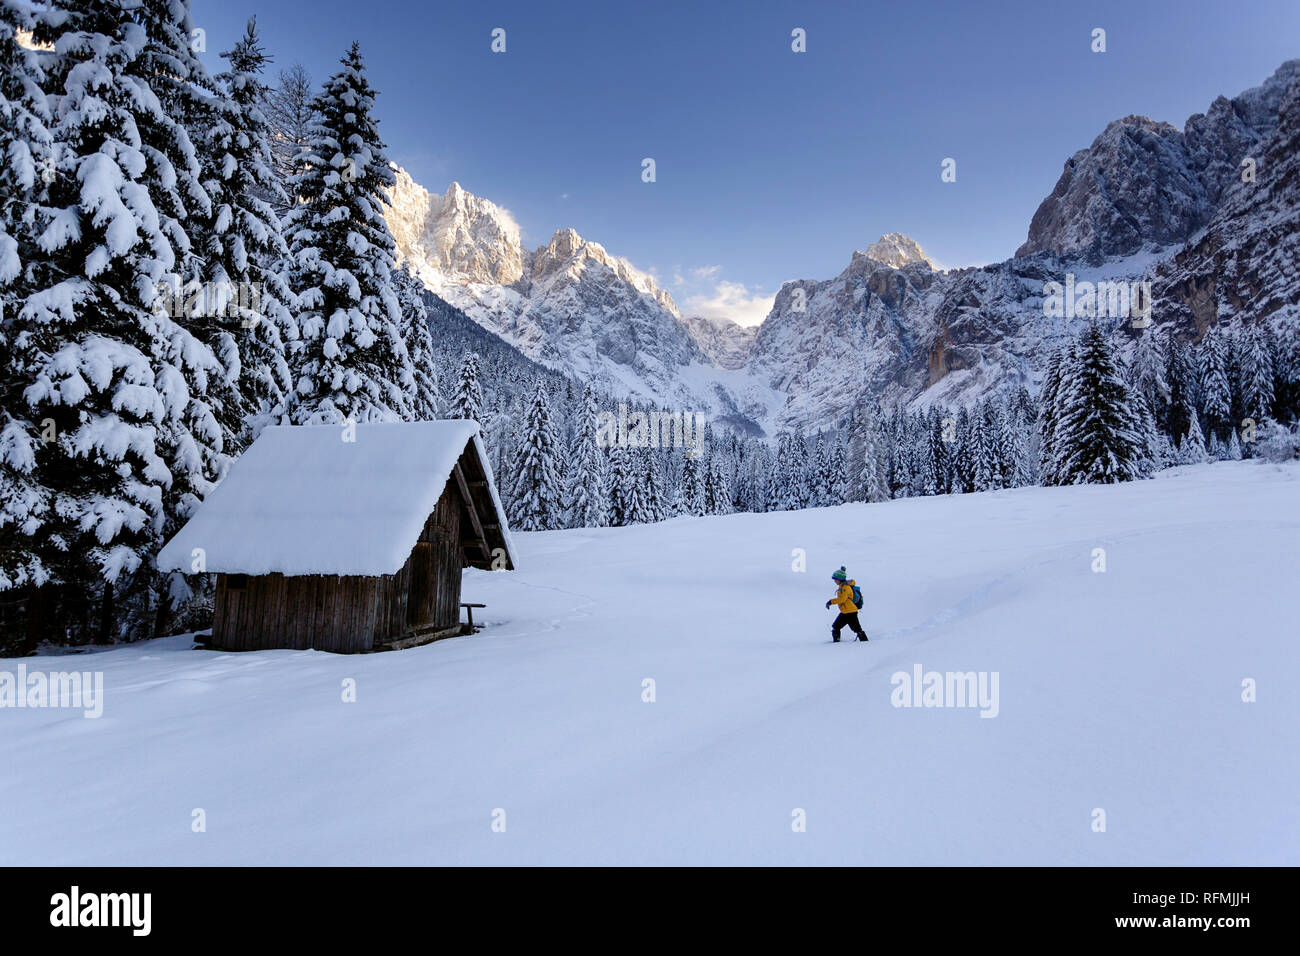 Winter outdoors can be fairytale-maker for children, young boy hiking in snow to a wooden chalet, mountains in light in the background Julian Alps Stock Photo